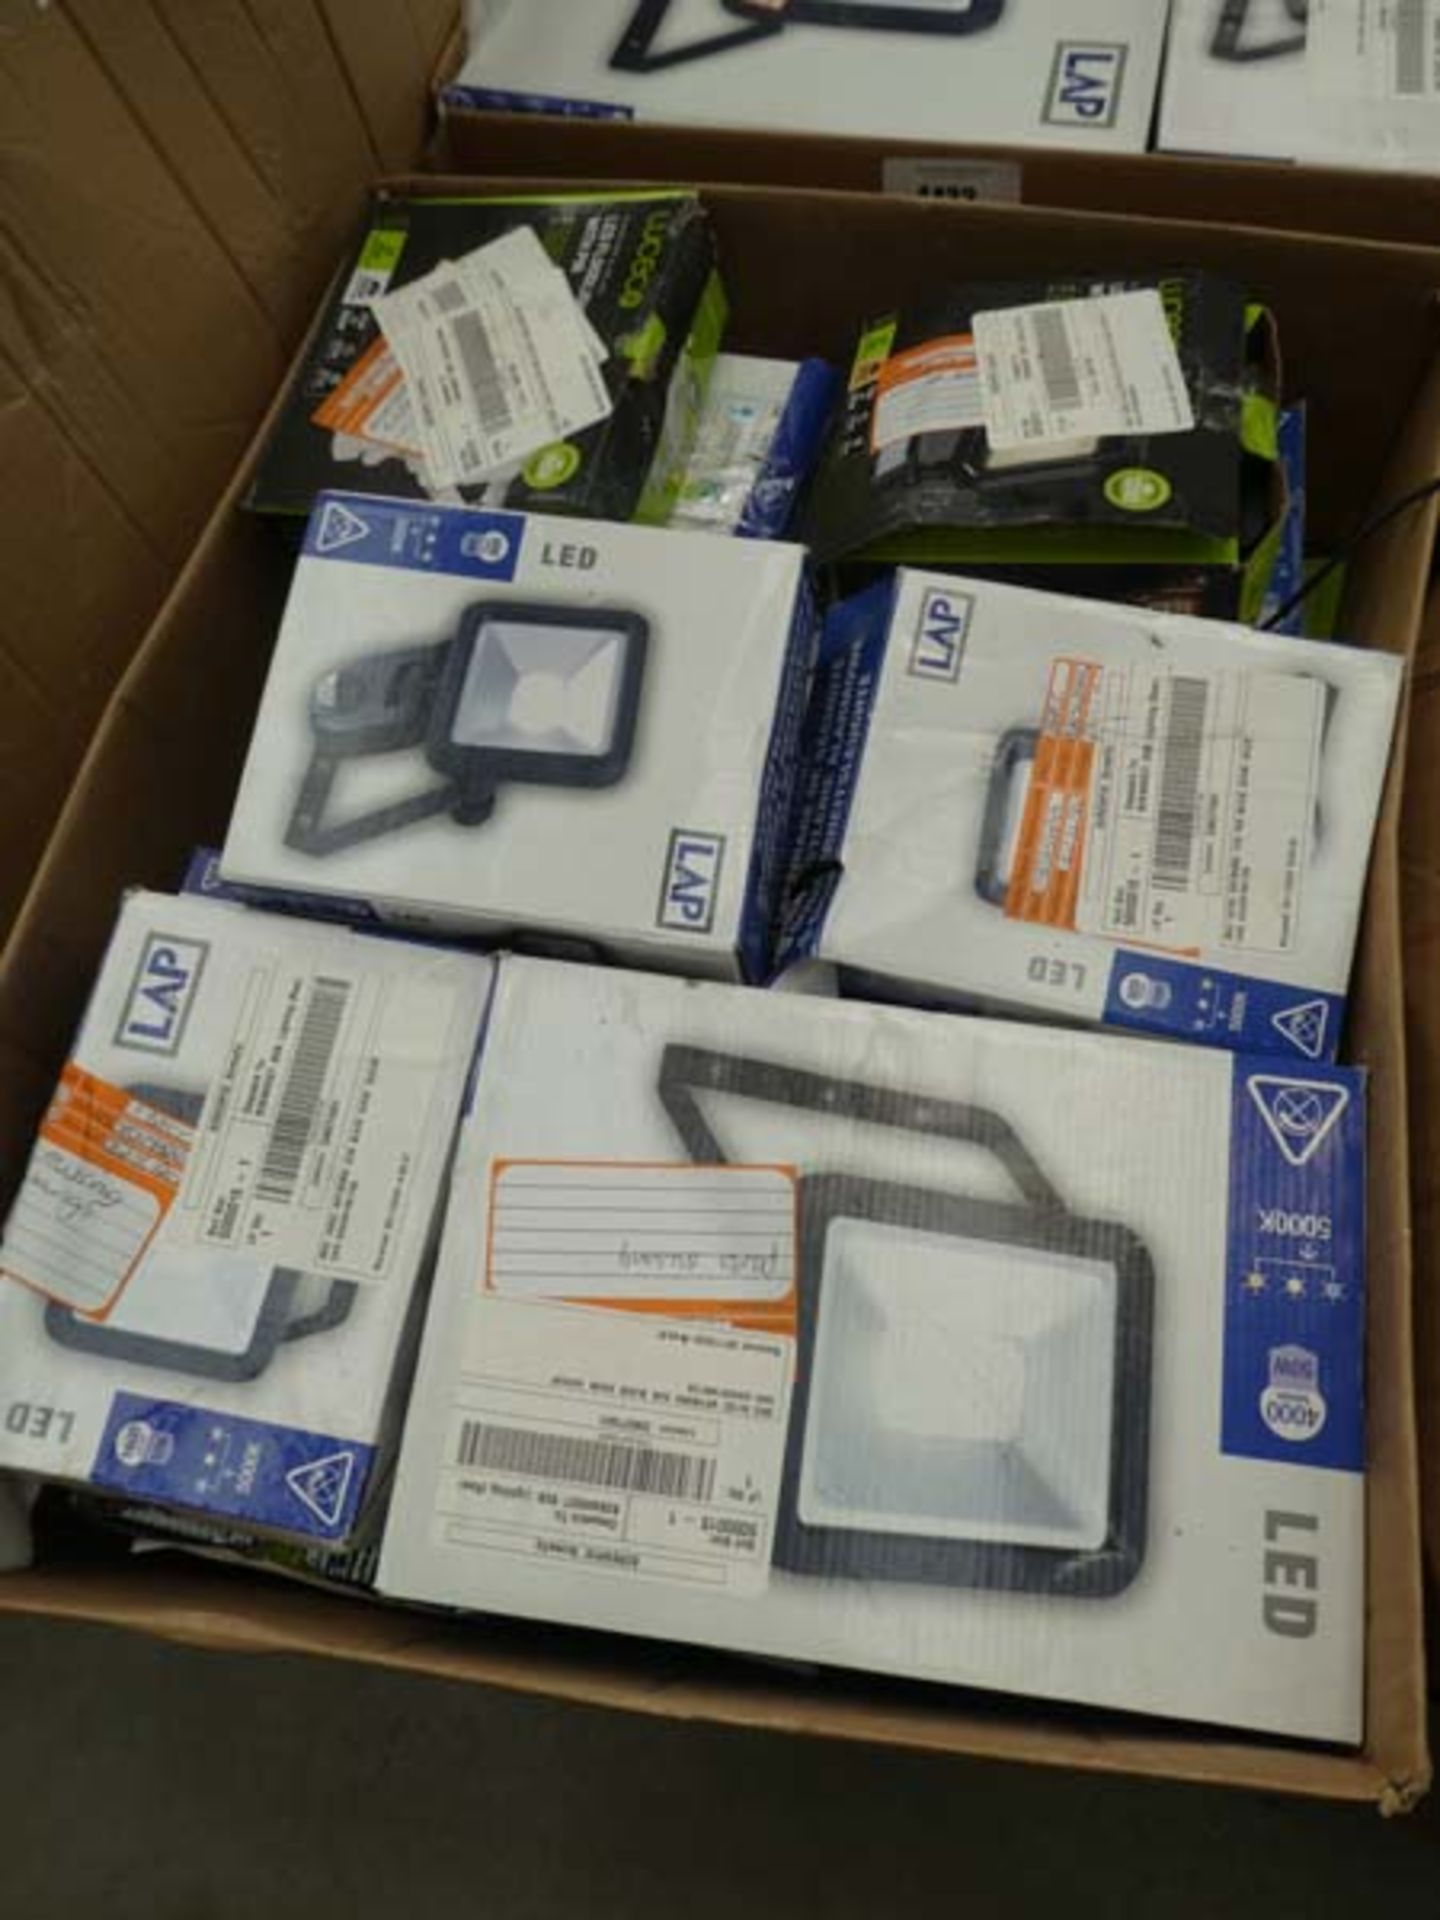 Box of security lights